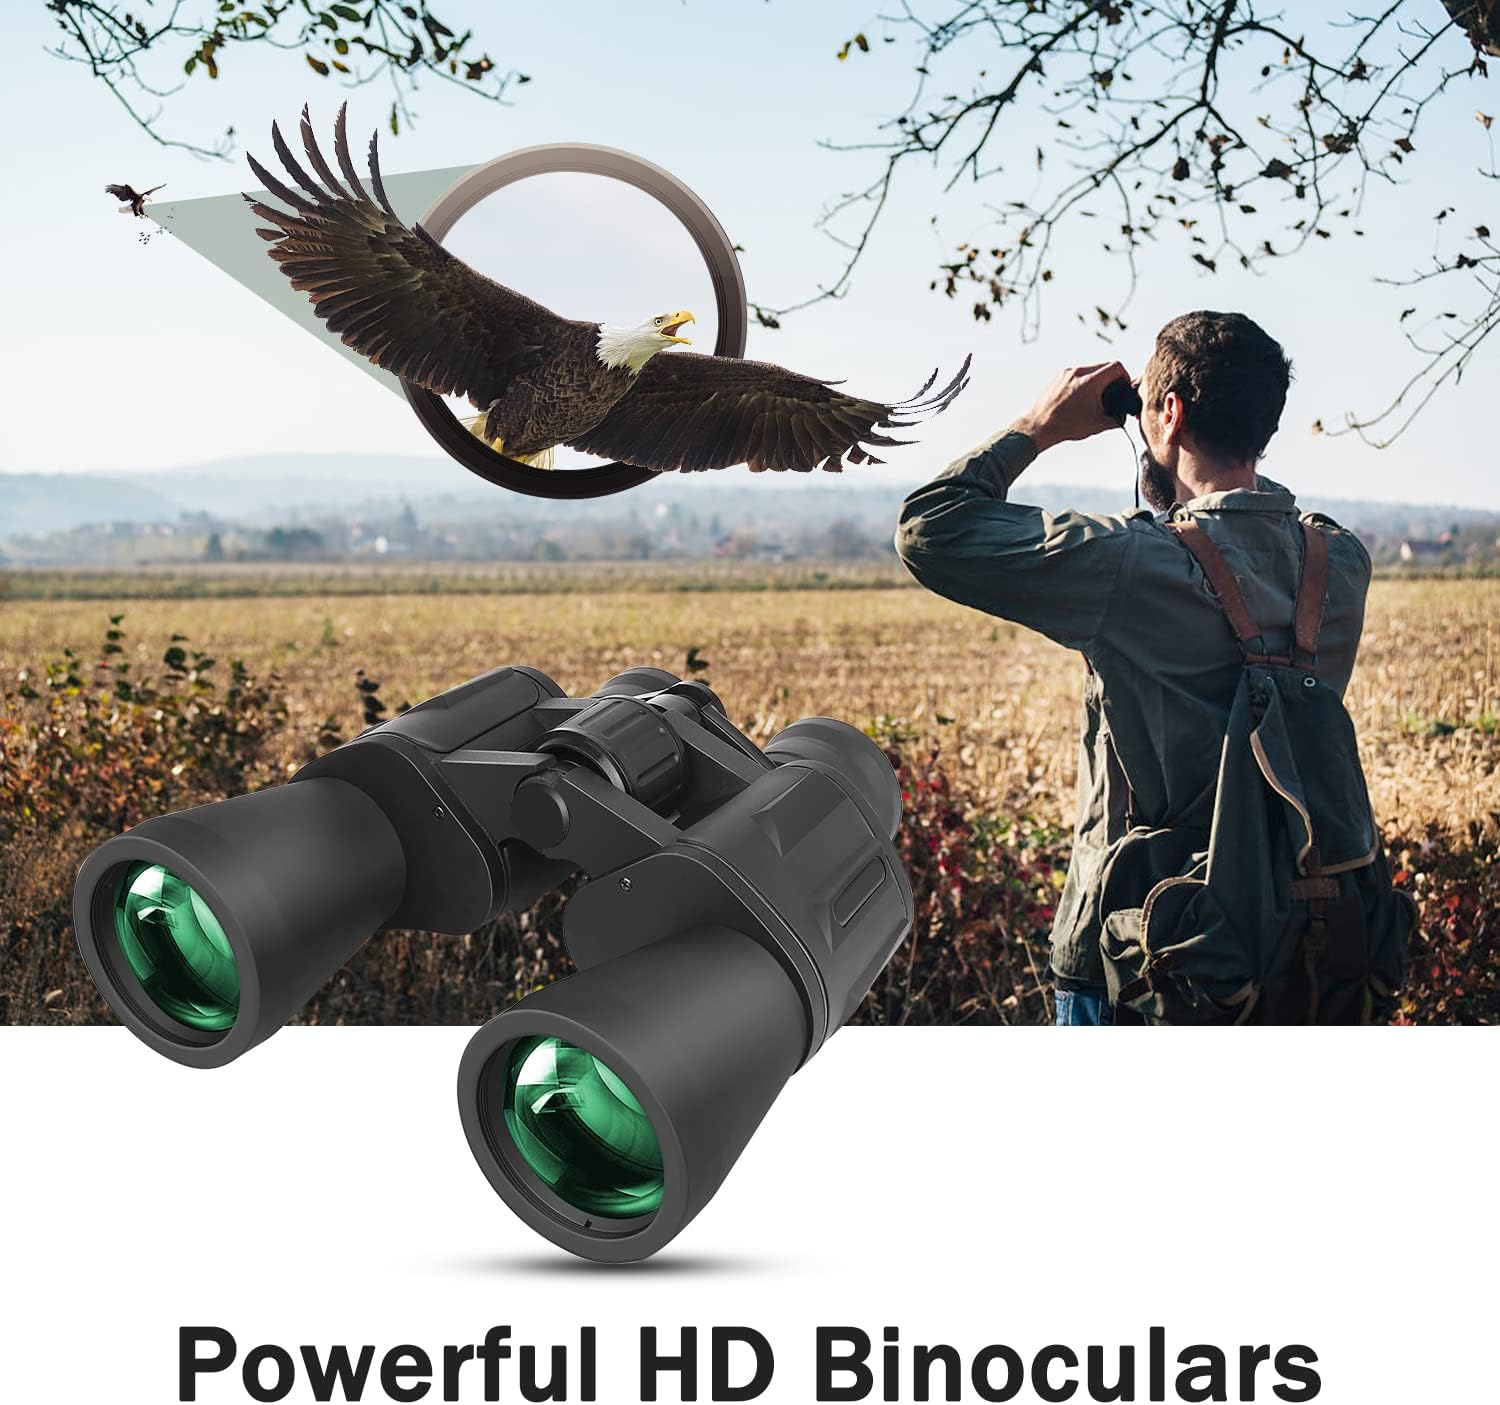 10 x 50 Binoculars for Adults, Powerful Binoculars for Bird Watching, Multi-Coated Optics Durable Full-Size Clear Binocular for Travel Sightseeing Outdoor Sports Games and Concerts